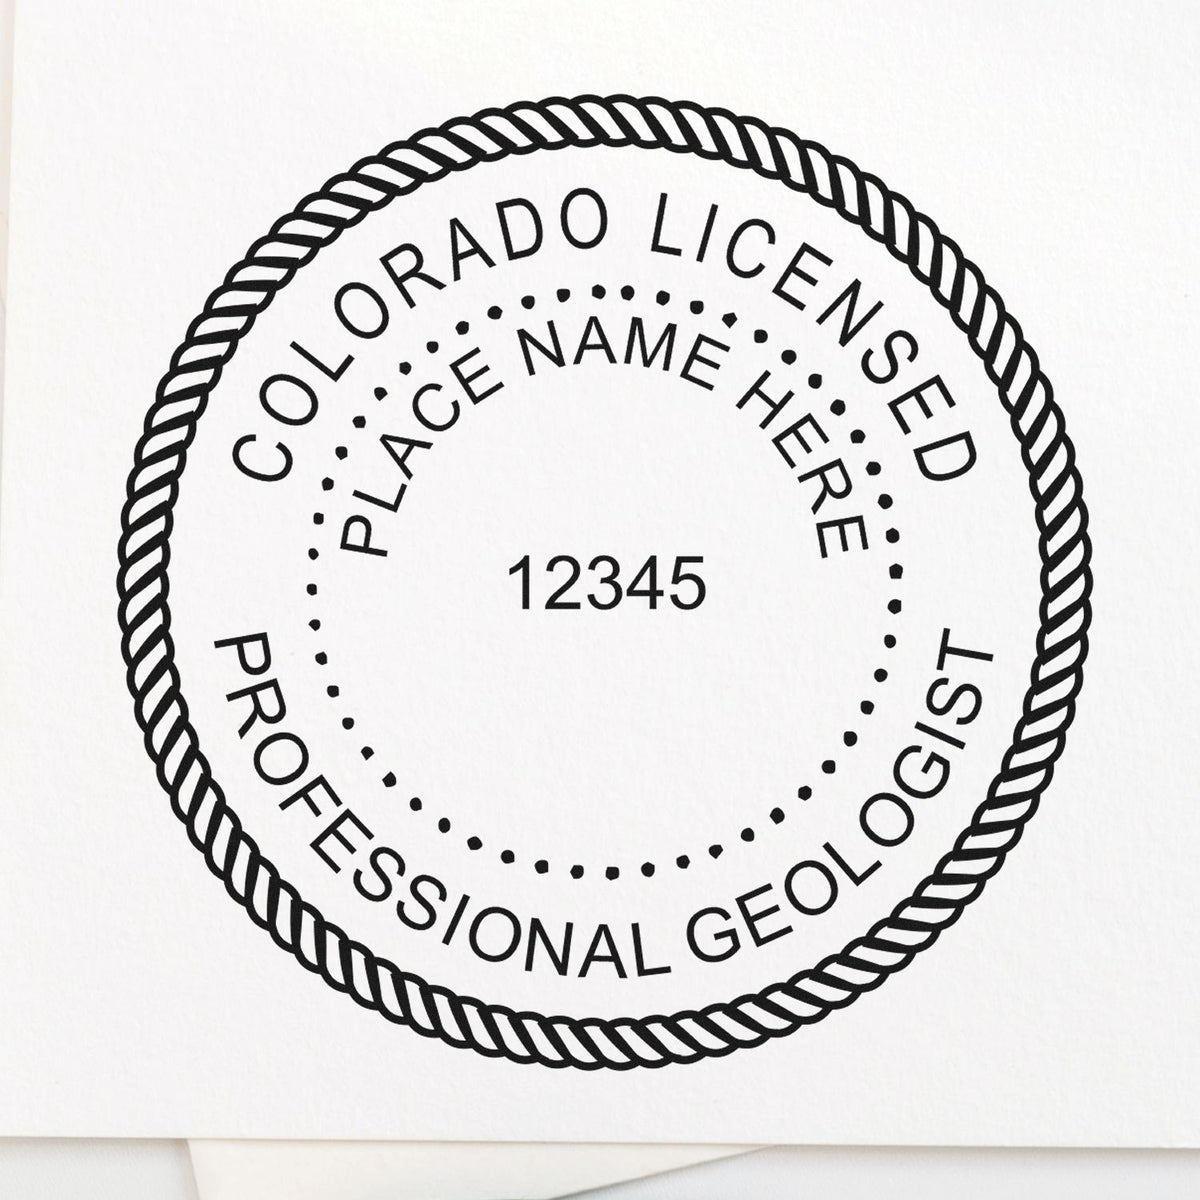 A photograph of the Digital Colorado Geologist Stamp, Electronic Seal for Colorado Geologist stamp impression reveals a vivid, professional image of the on paper.